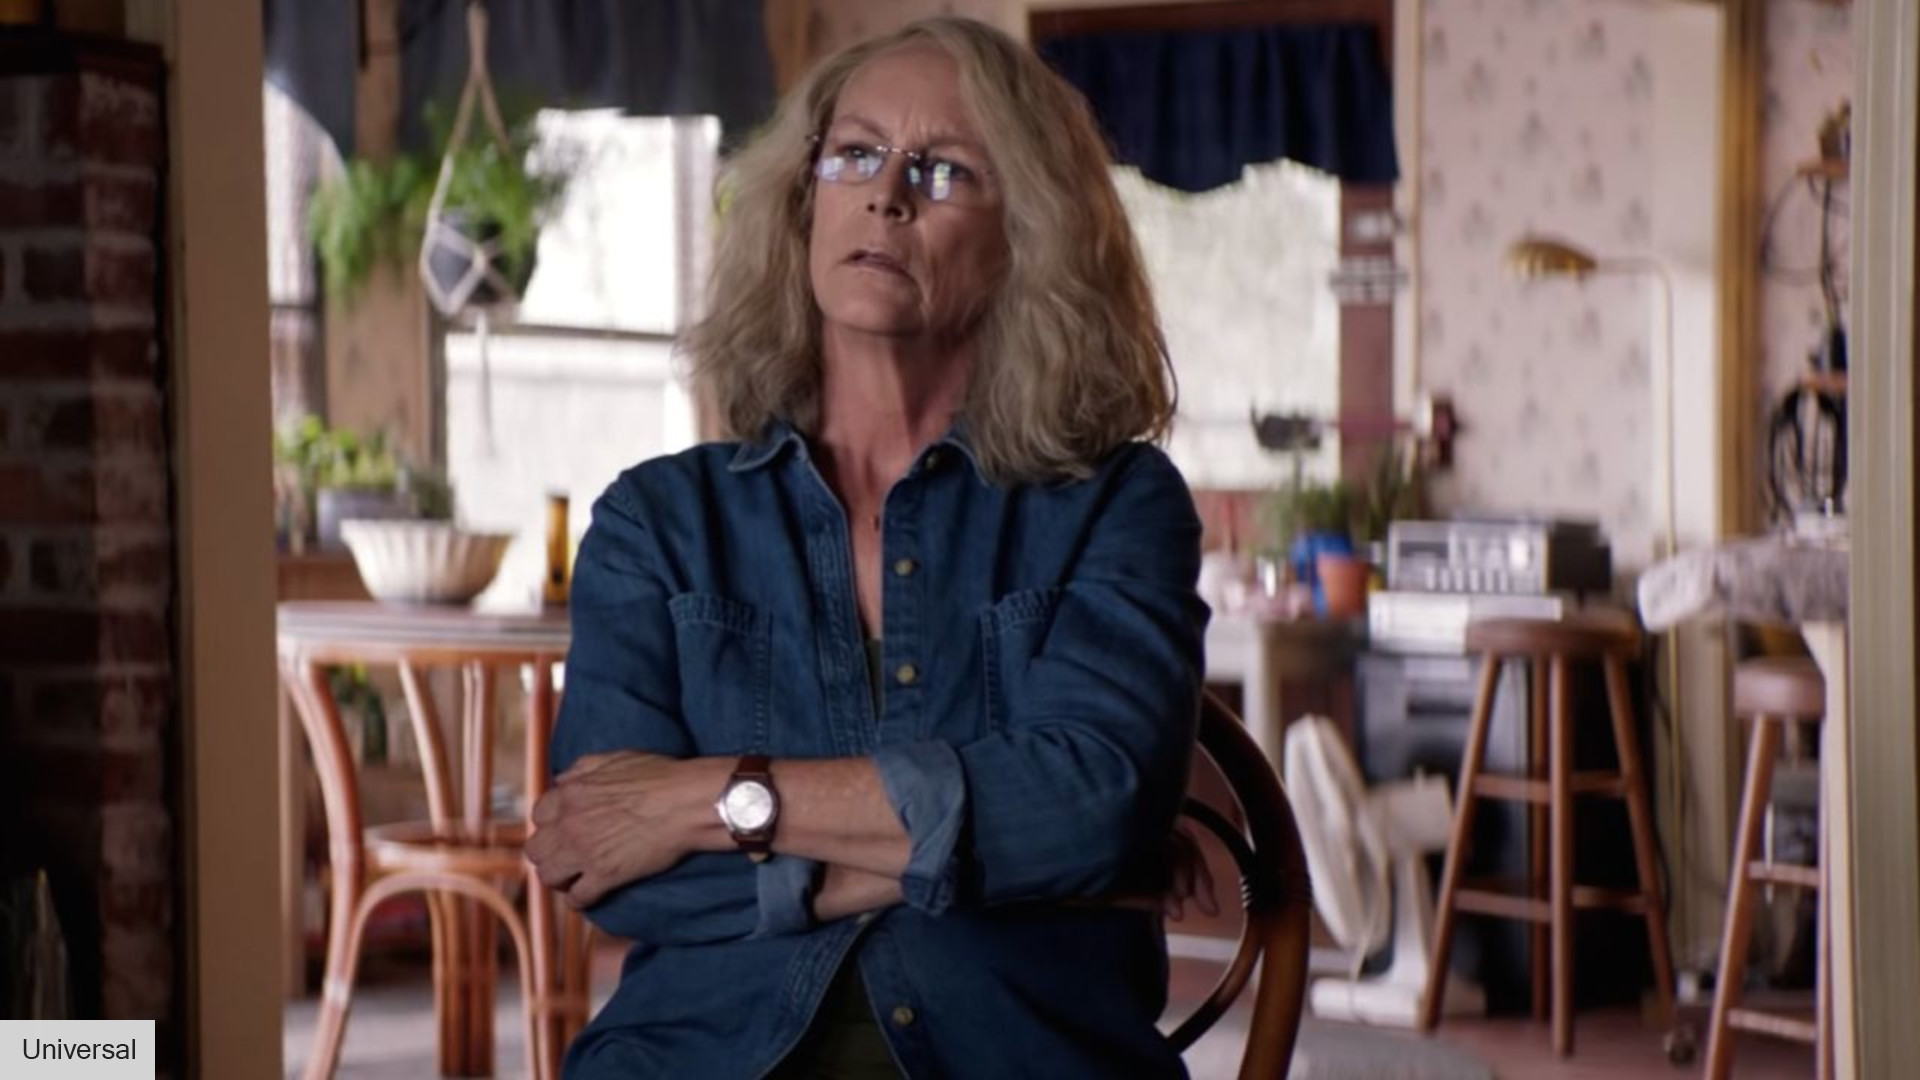 Jamie Lee Curtis comments on the Halloween trauma meme | The Digital Fix